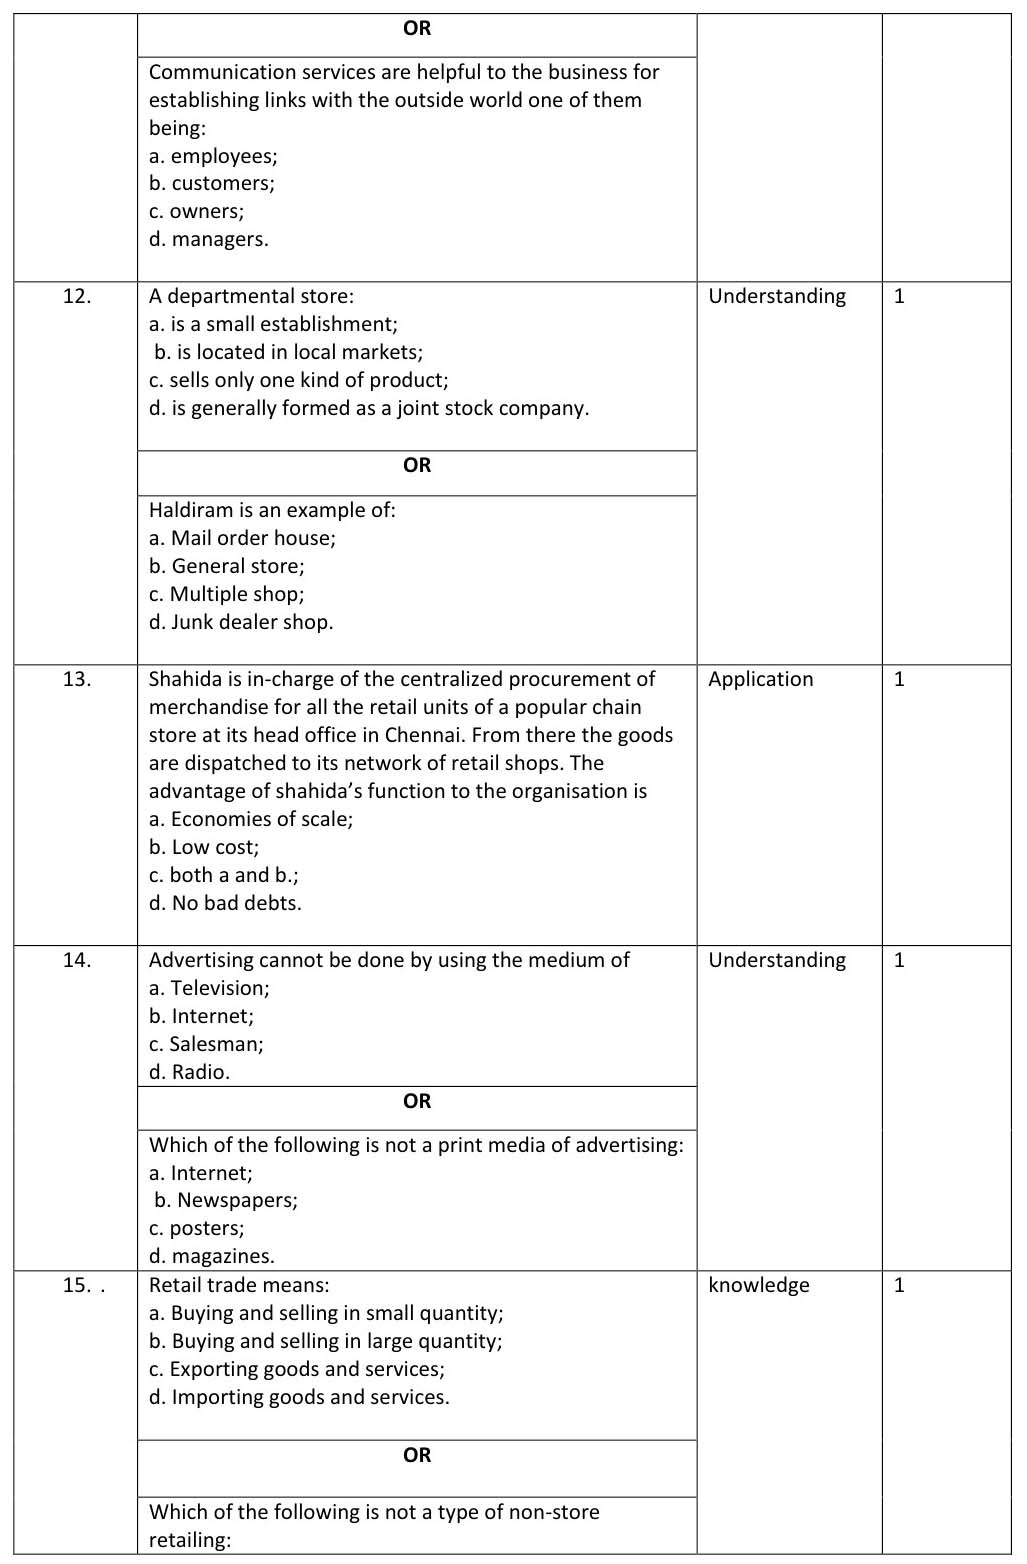 Element of Business CBSE Class X Sample Question Paper 2018-19 - Image 3